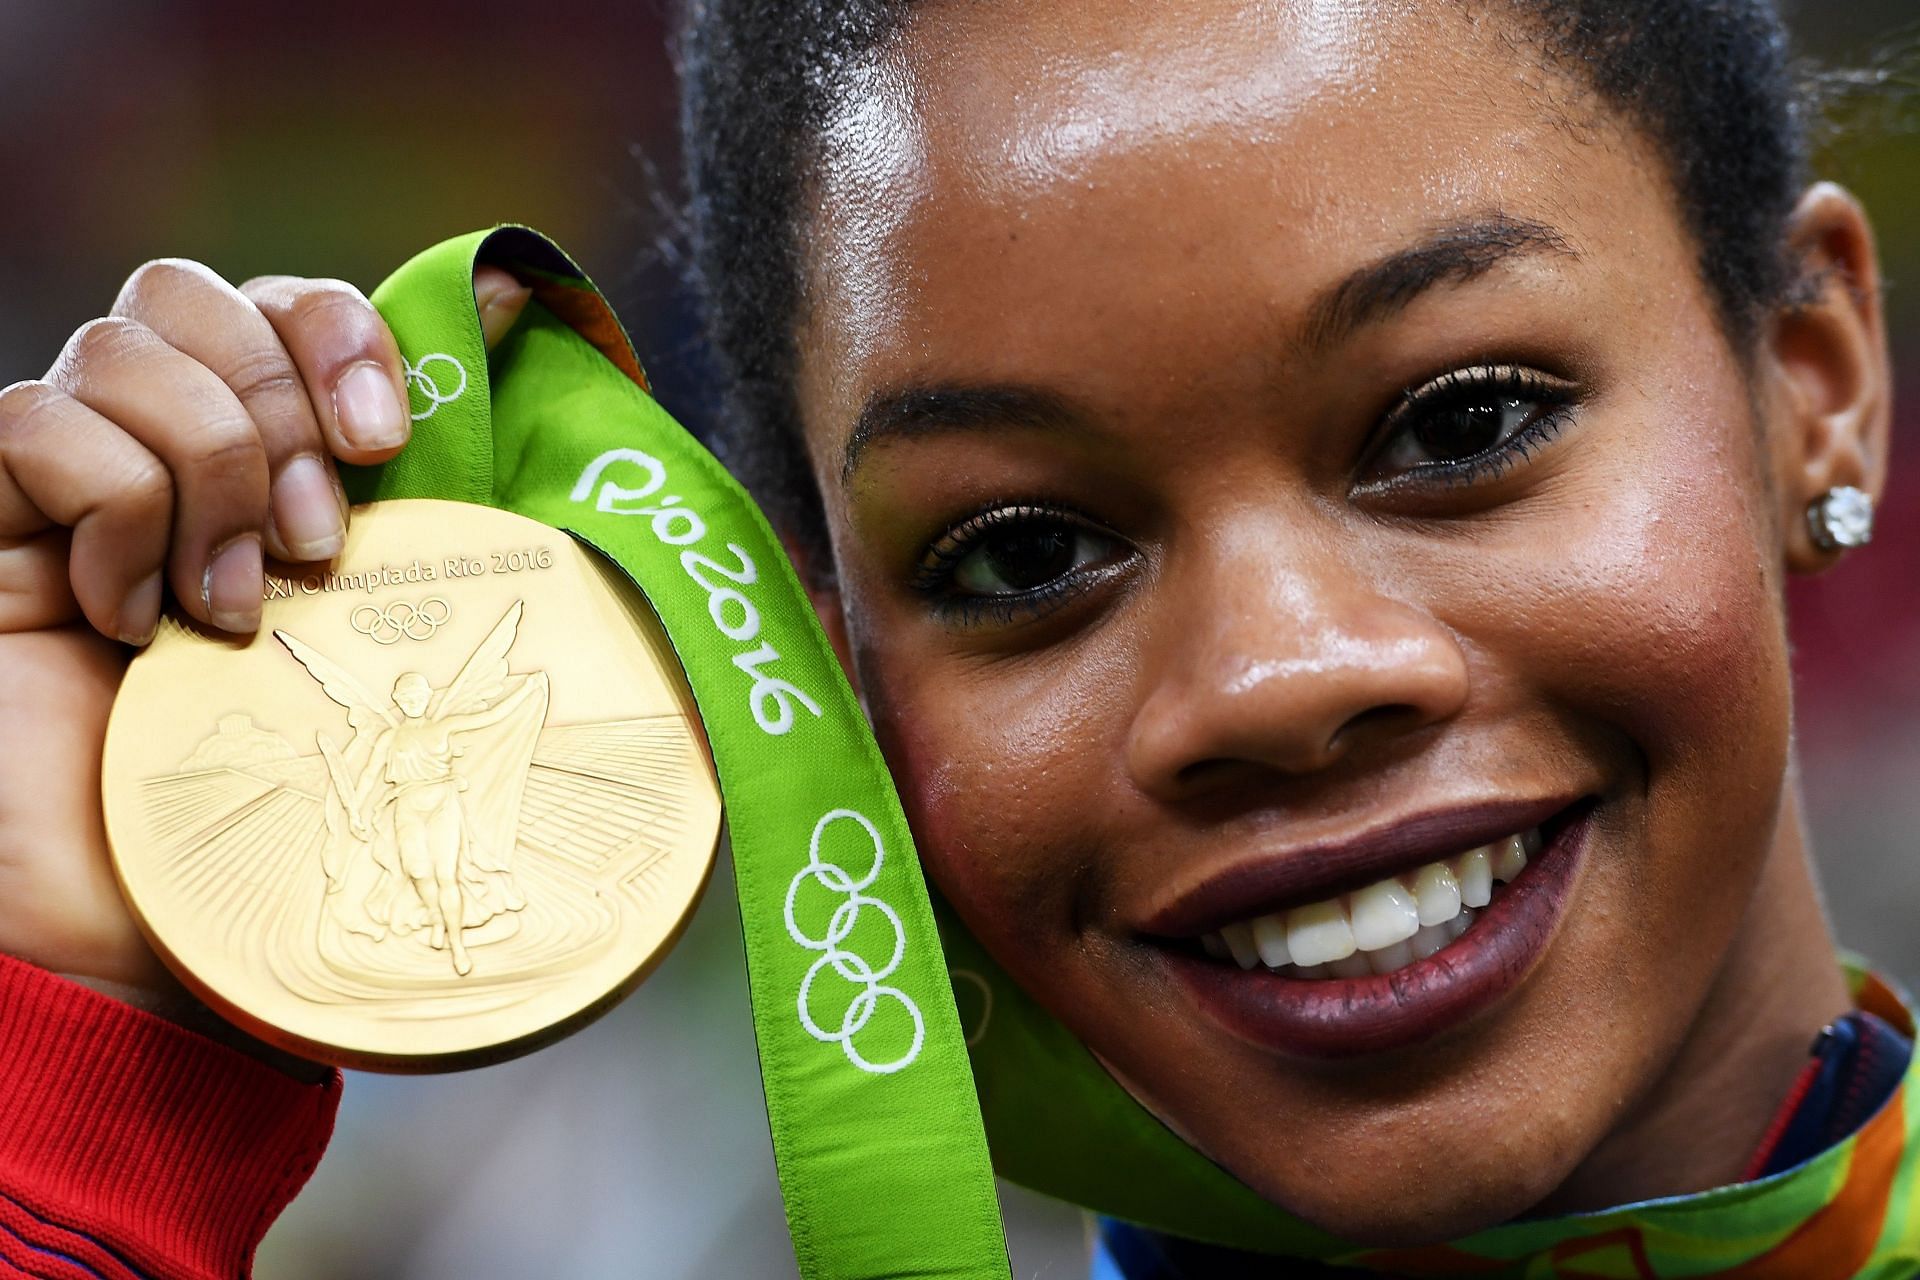 Gabrielle Douglas poses with her gold medal at the Rio 2016 Olympic Games.